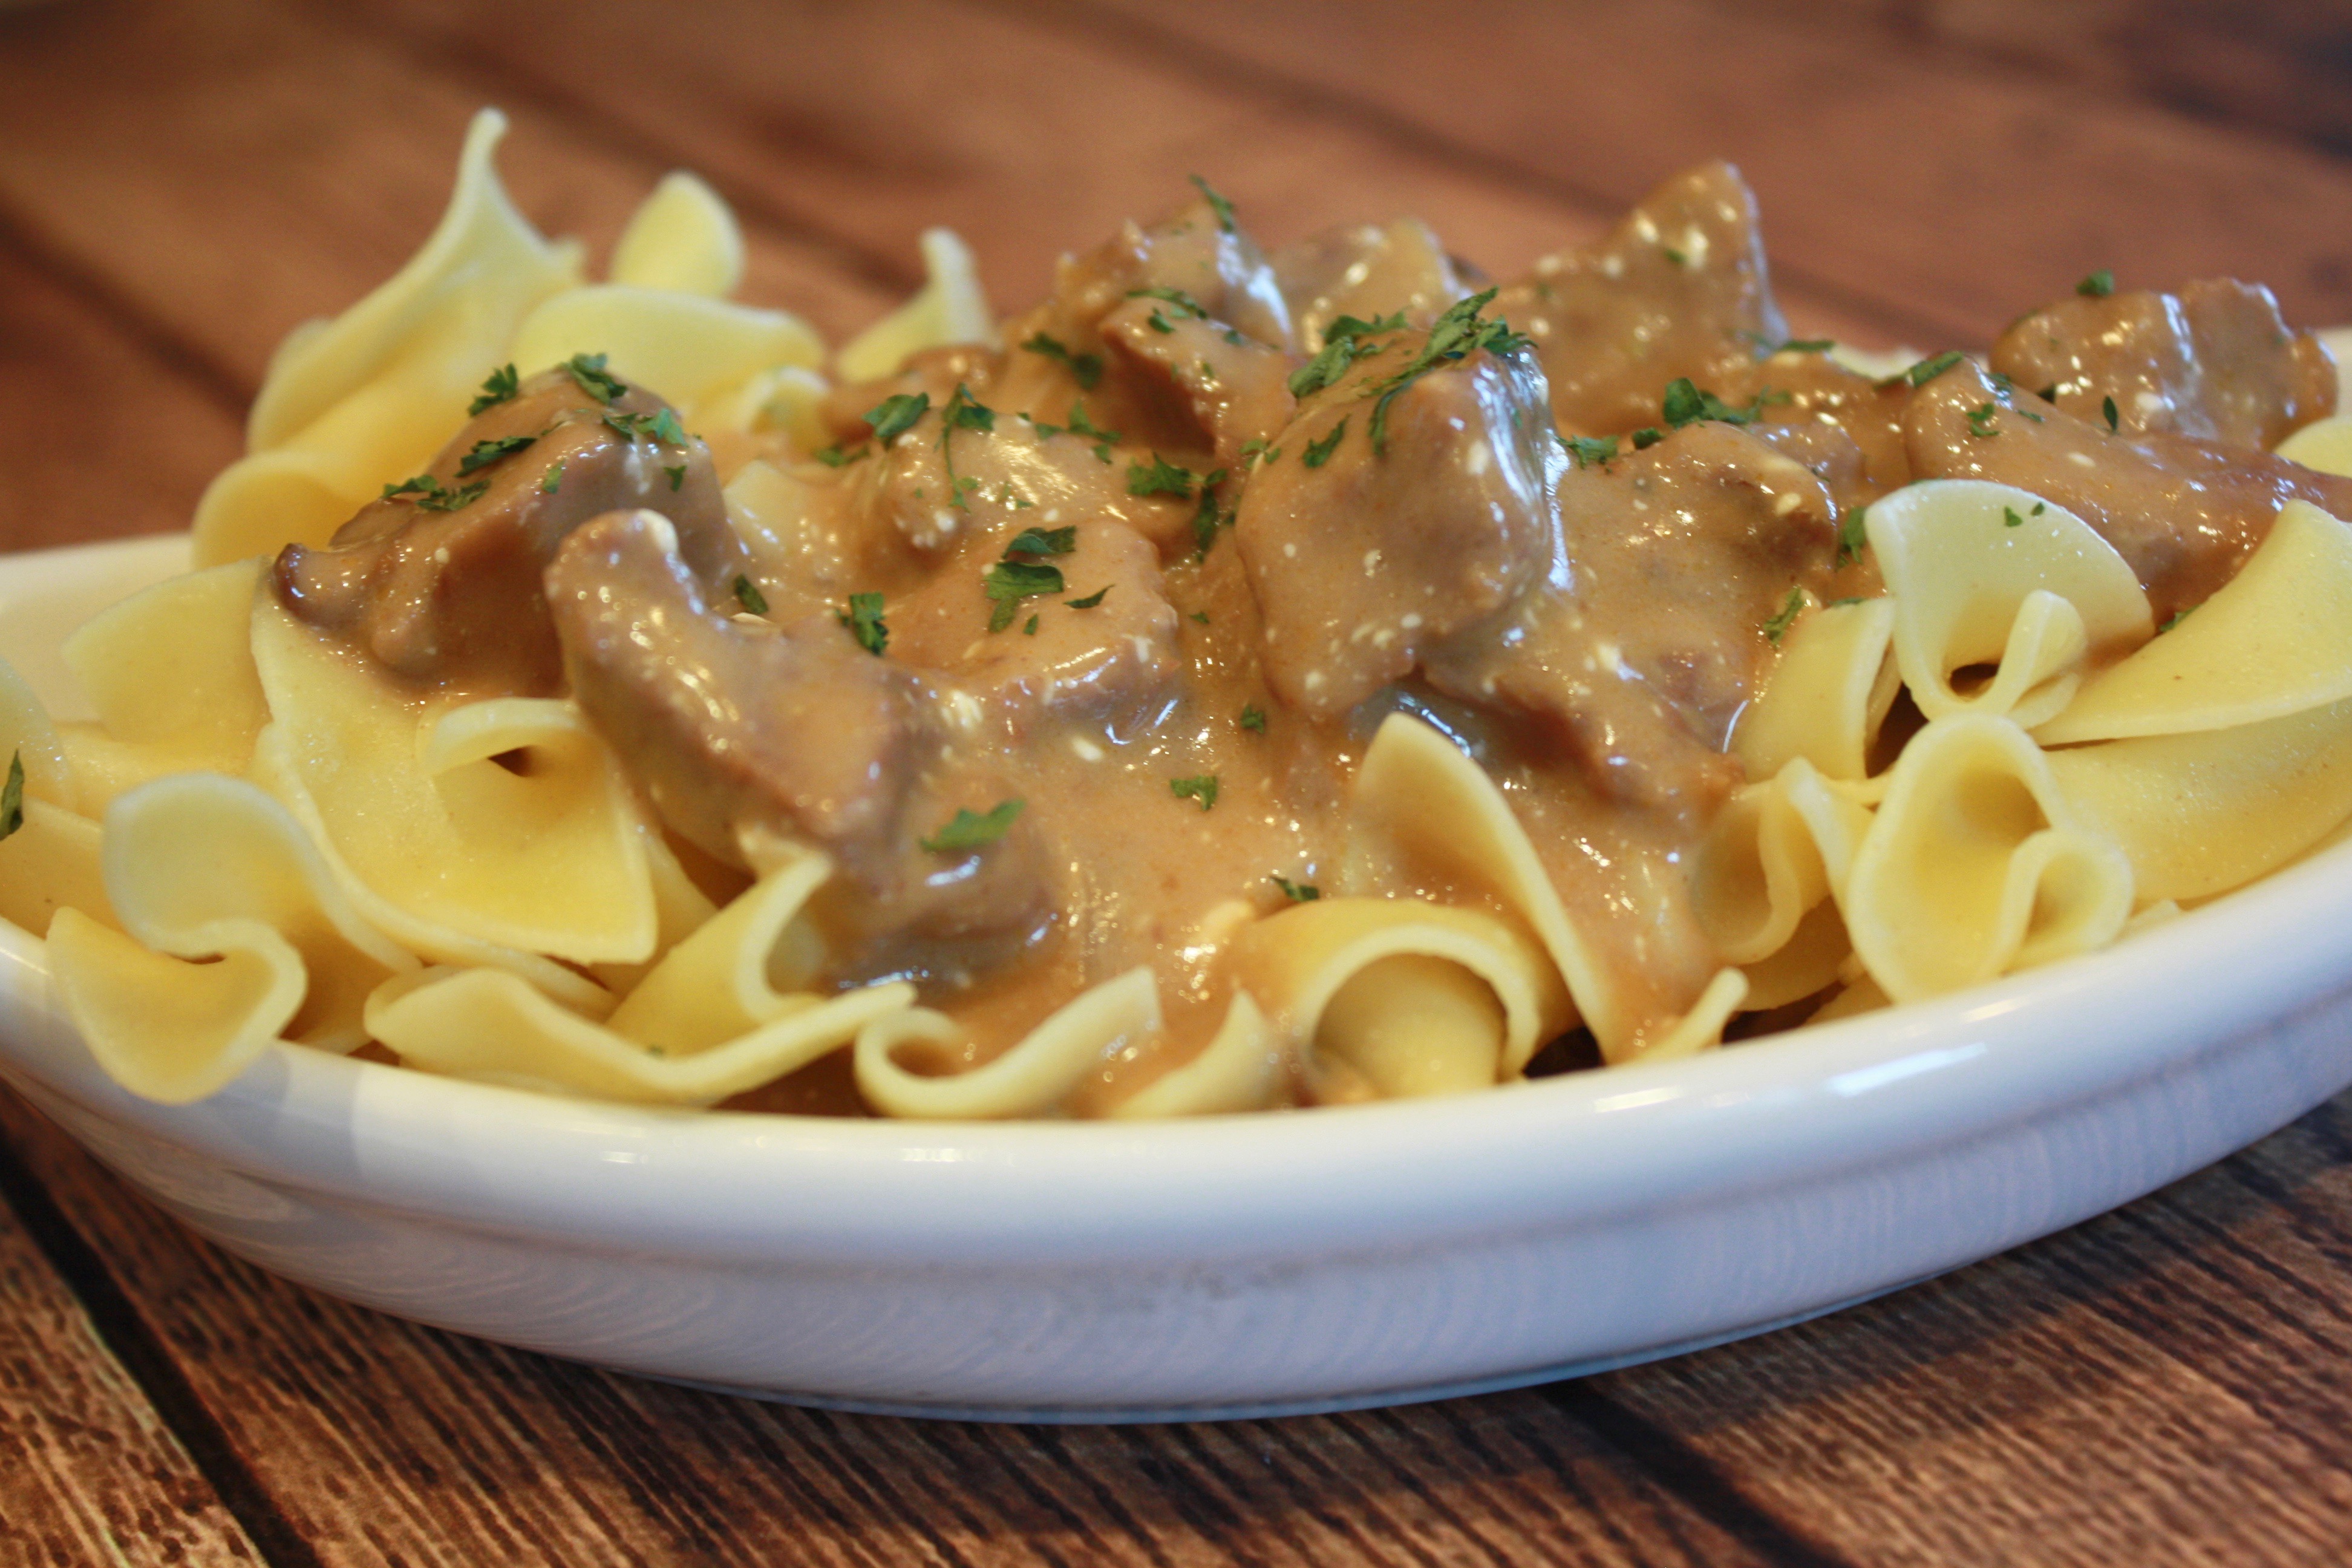 Slow Cooker Beef Stroganoff ~ An easy crock pot meal featuring tender beef and hearty mushrooms in a sour cream sauce. This is an easy weeknight meal to serve too, as most of the cooking is done while you are away. The best kind of weeknight dinner recipes!